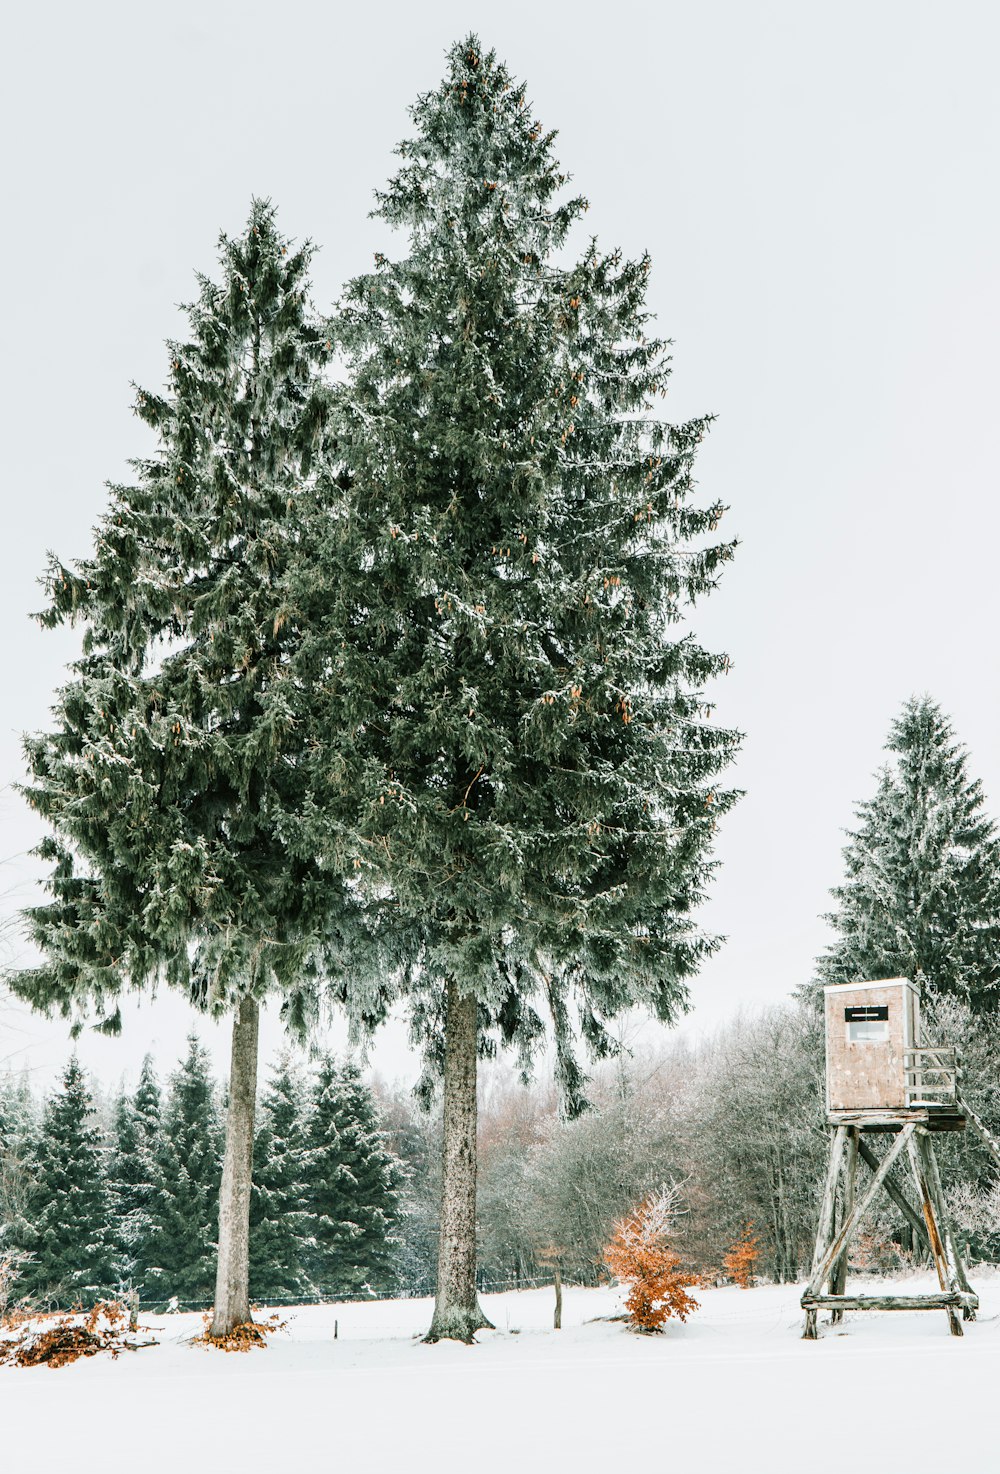 wooden tower near trees during winter